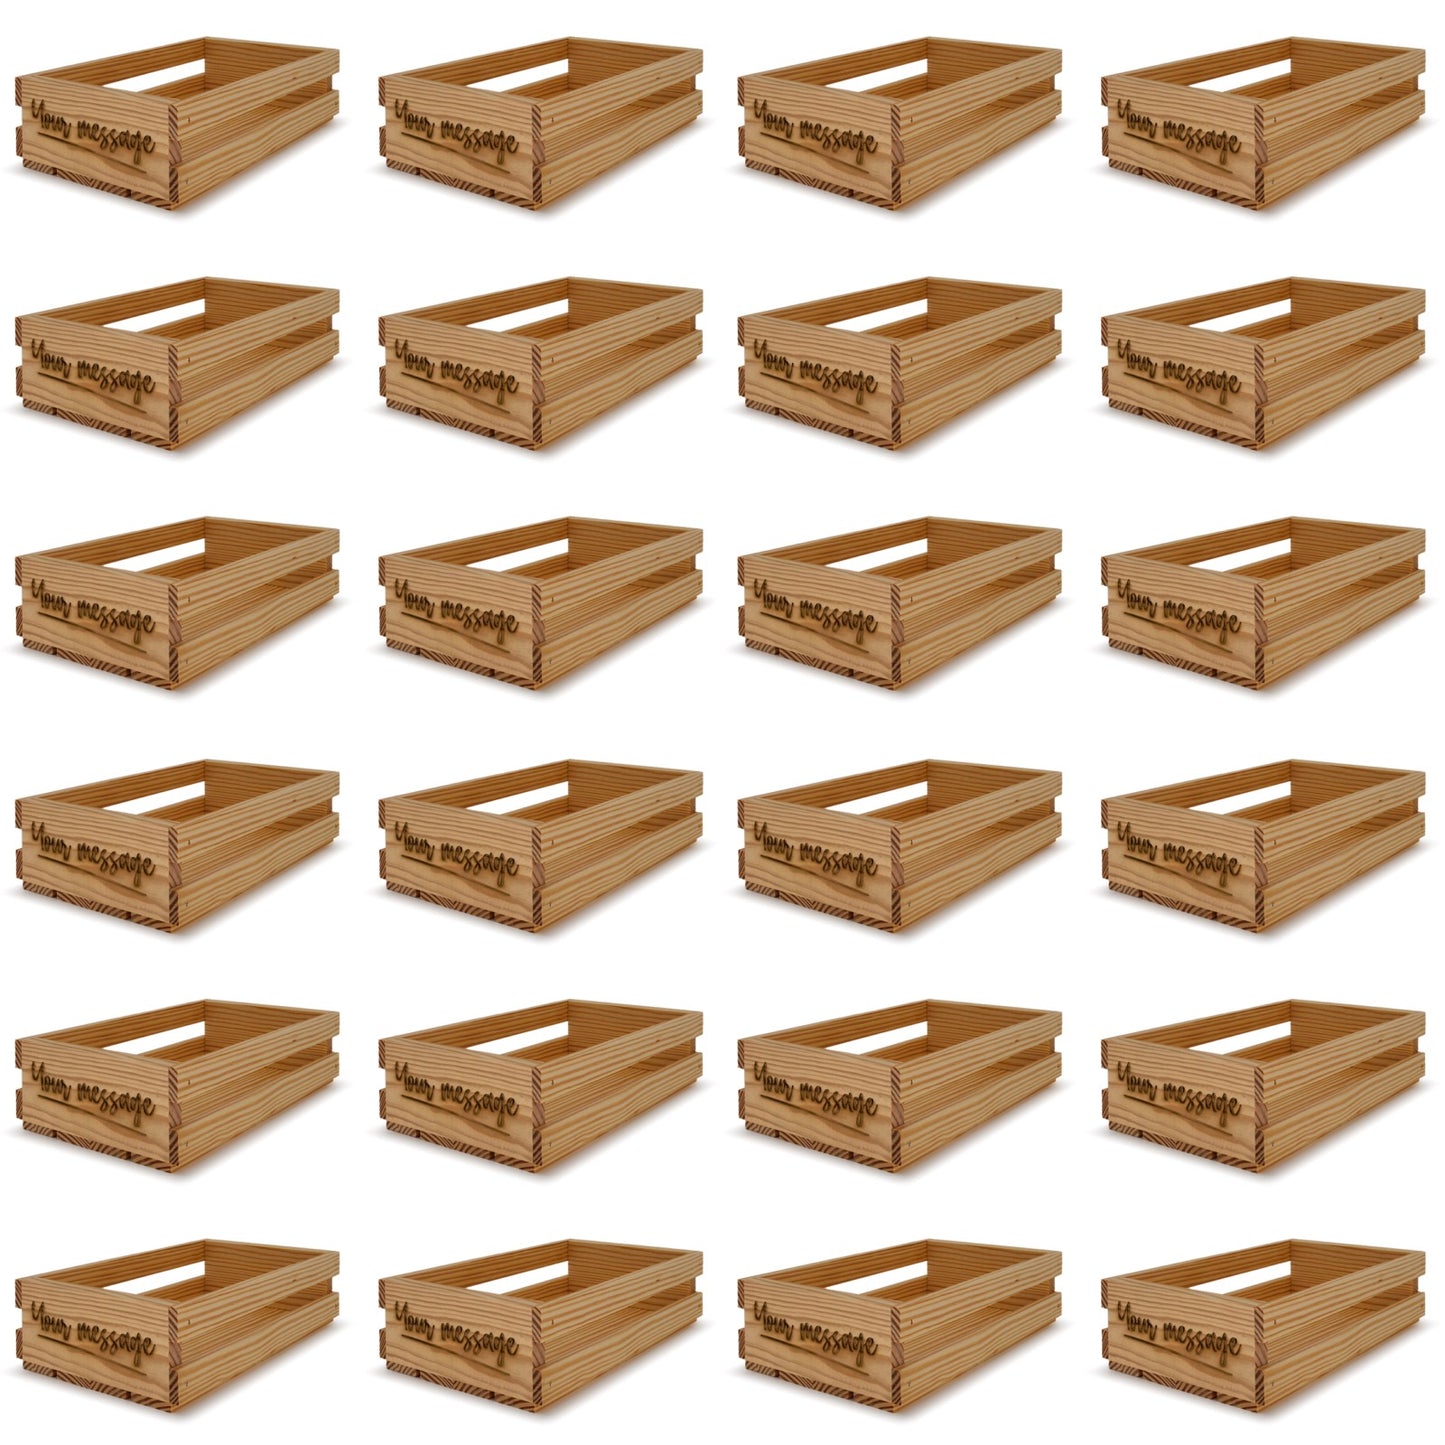 24 Small wooden crates 13x7.5x3.5 your message included